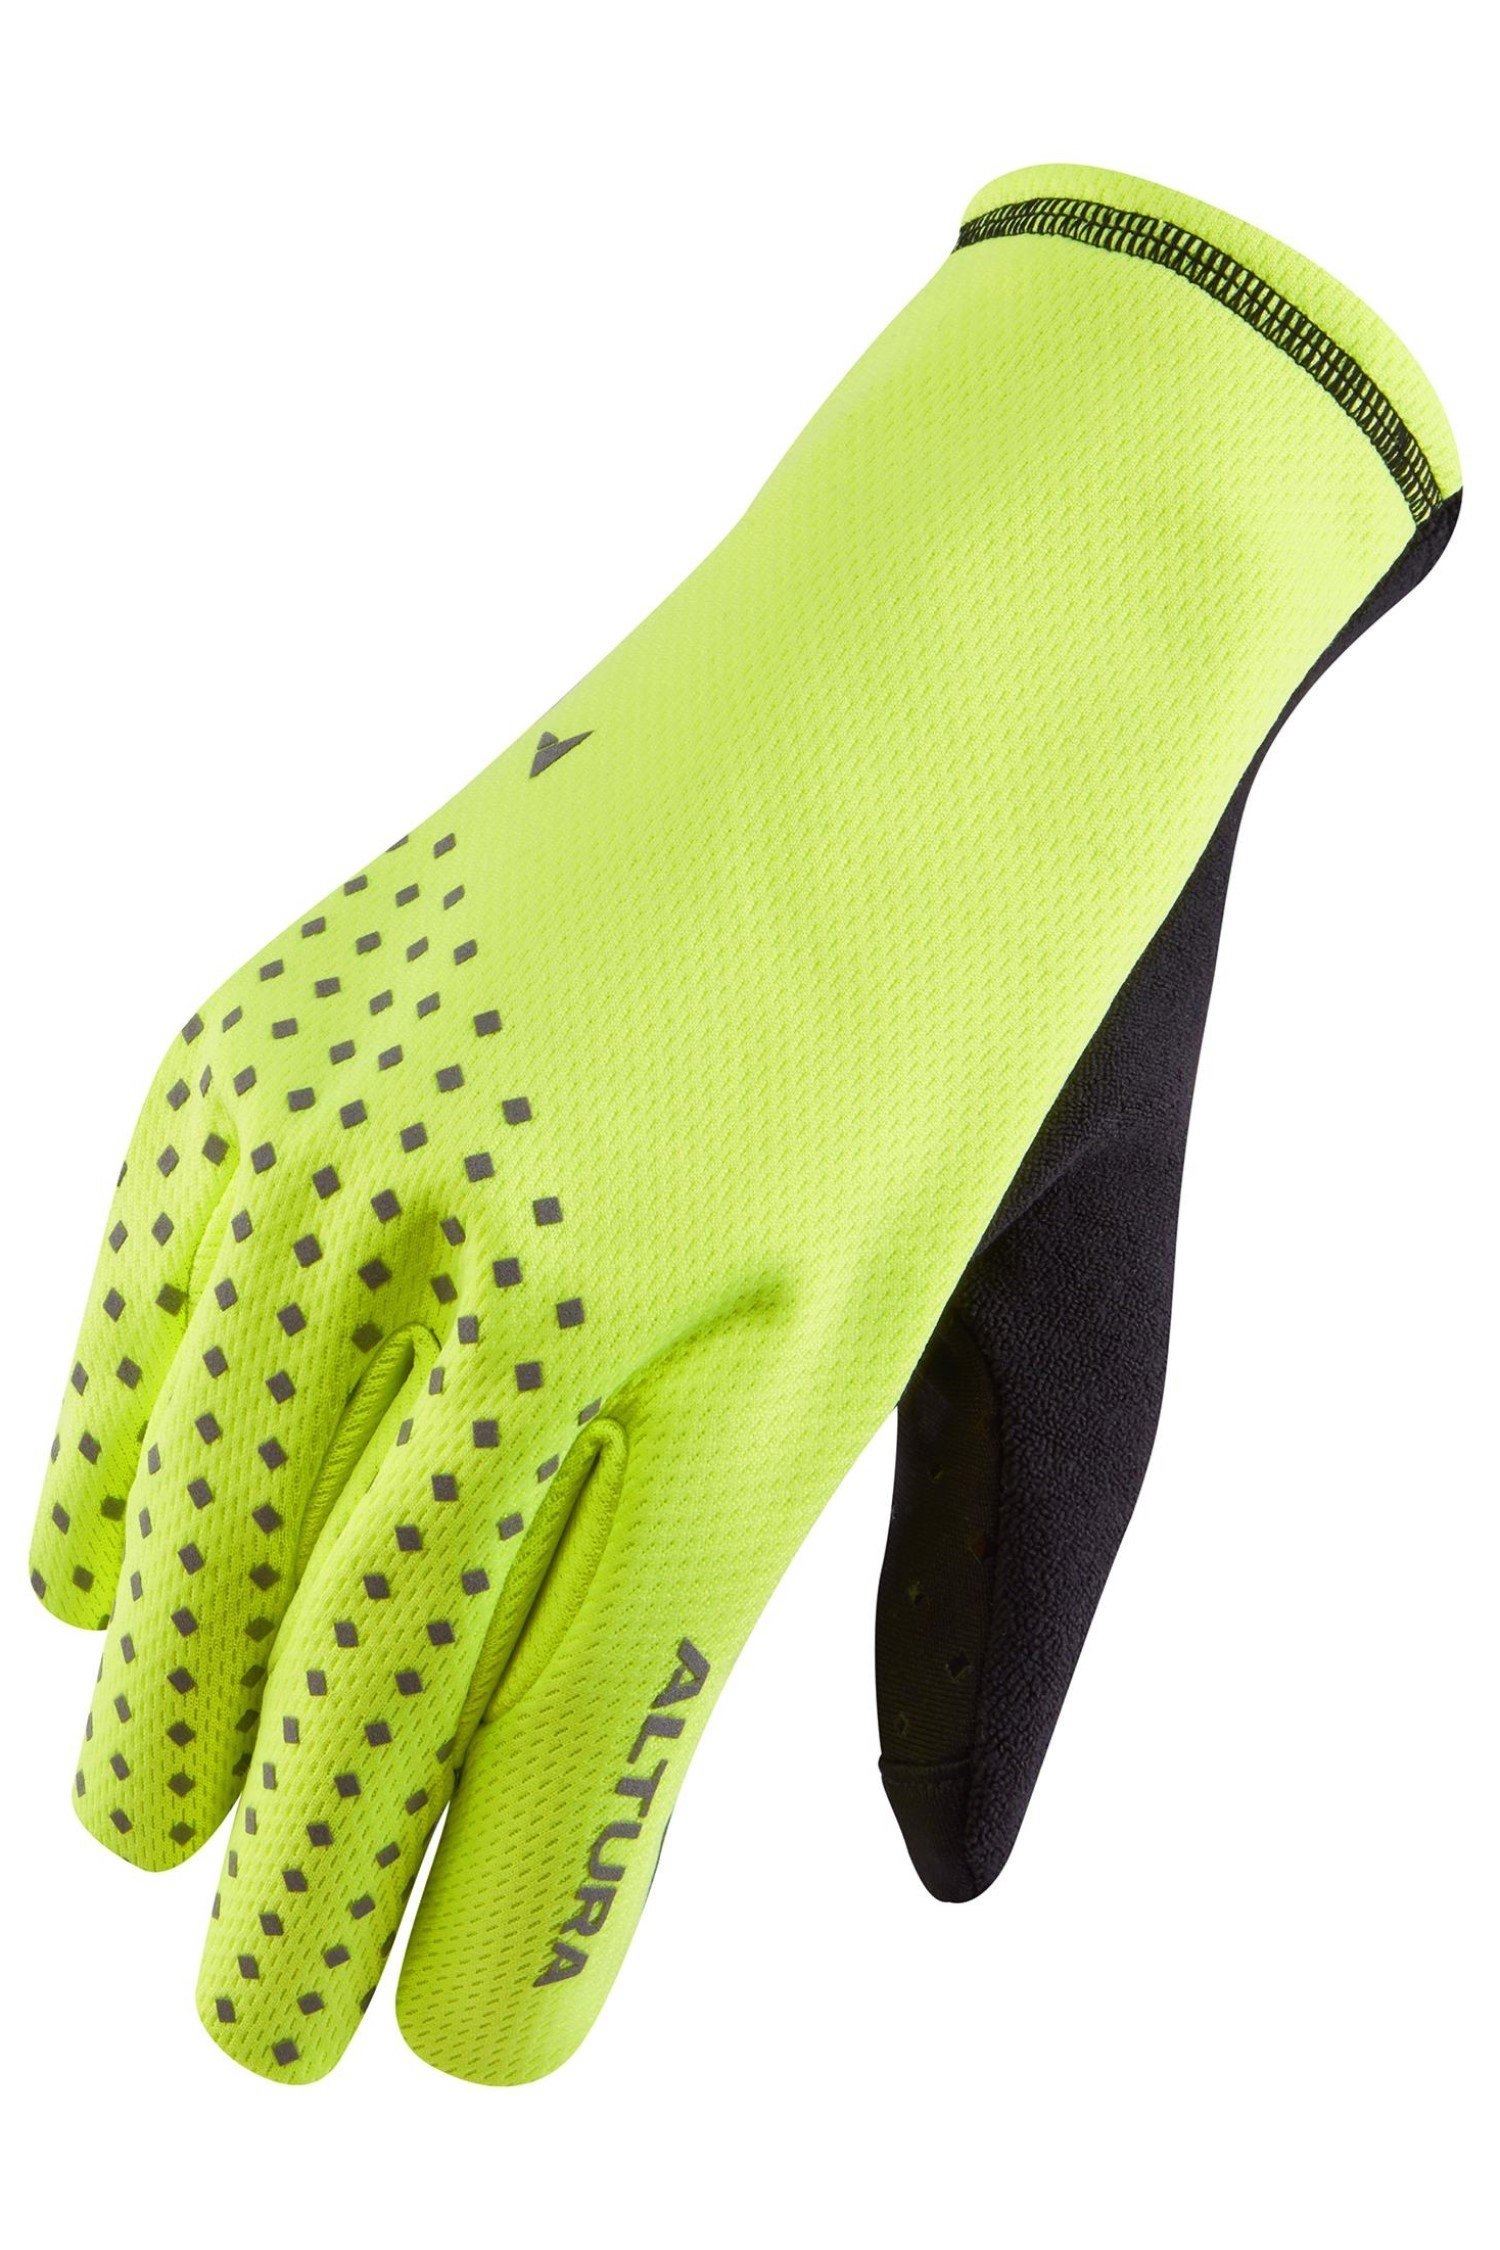 Nightvision Unisex Windproof Fleece Cycling Gloves -